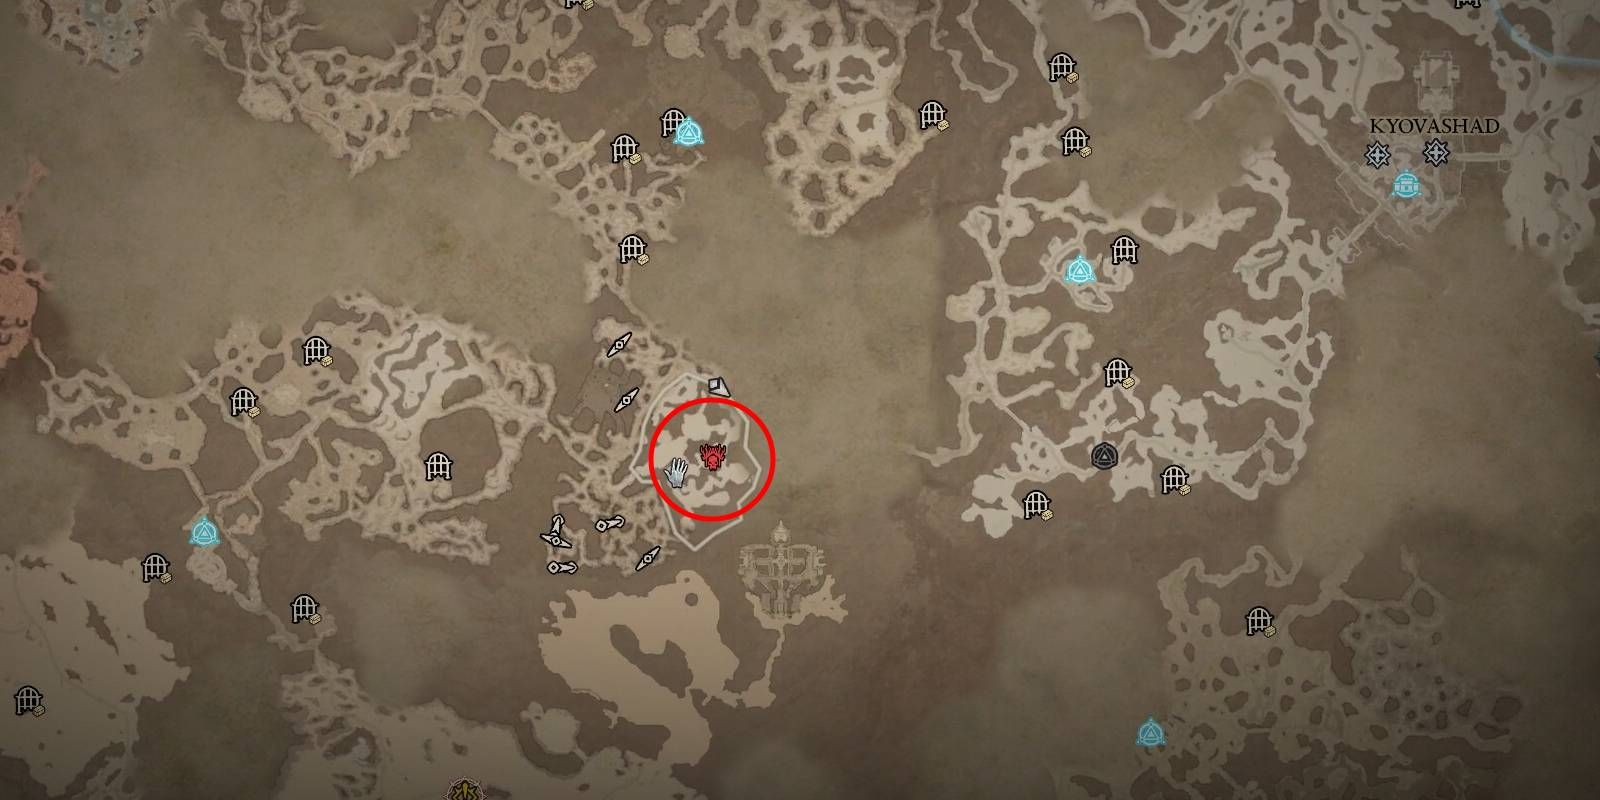 Diablo 4 Dry Steppes The Ruins of Qara-Yisu Stronghold Location on Map Marked by Red Circle